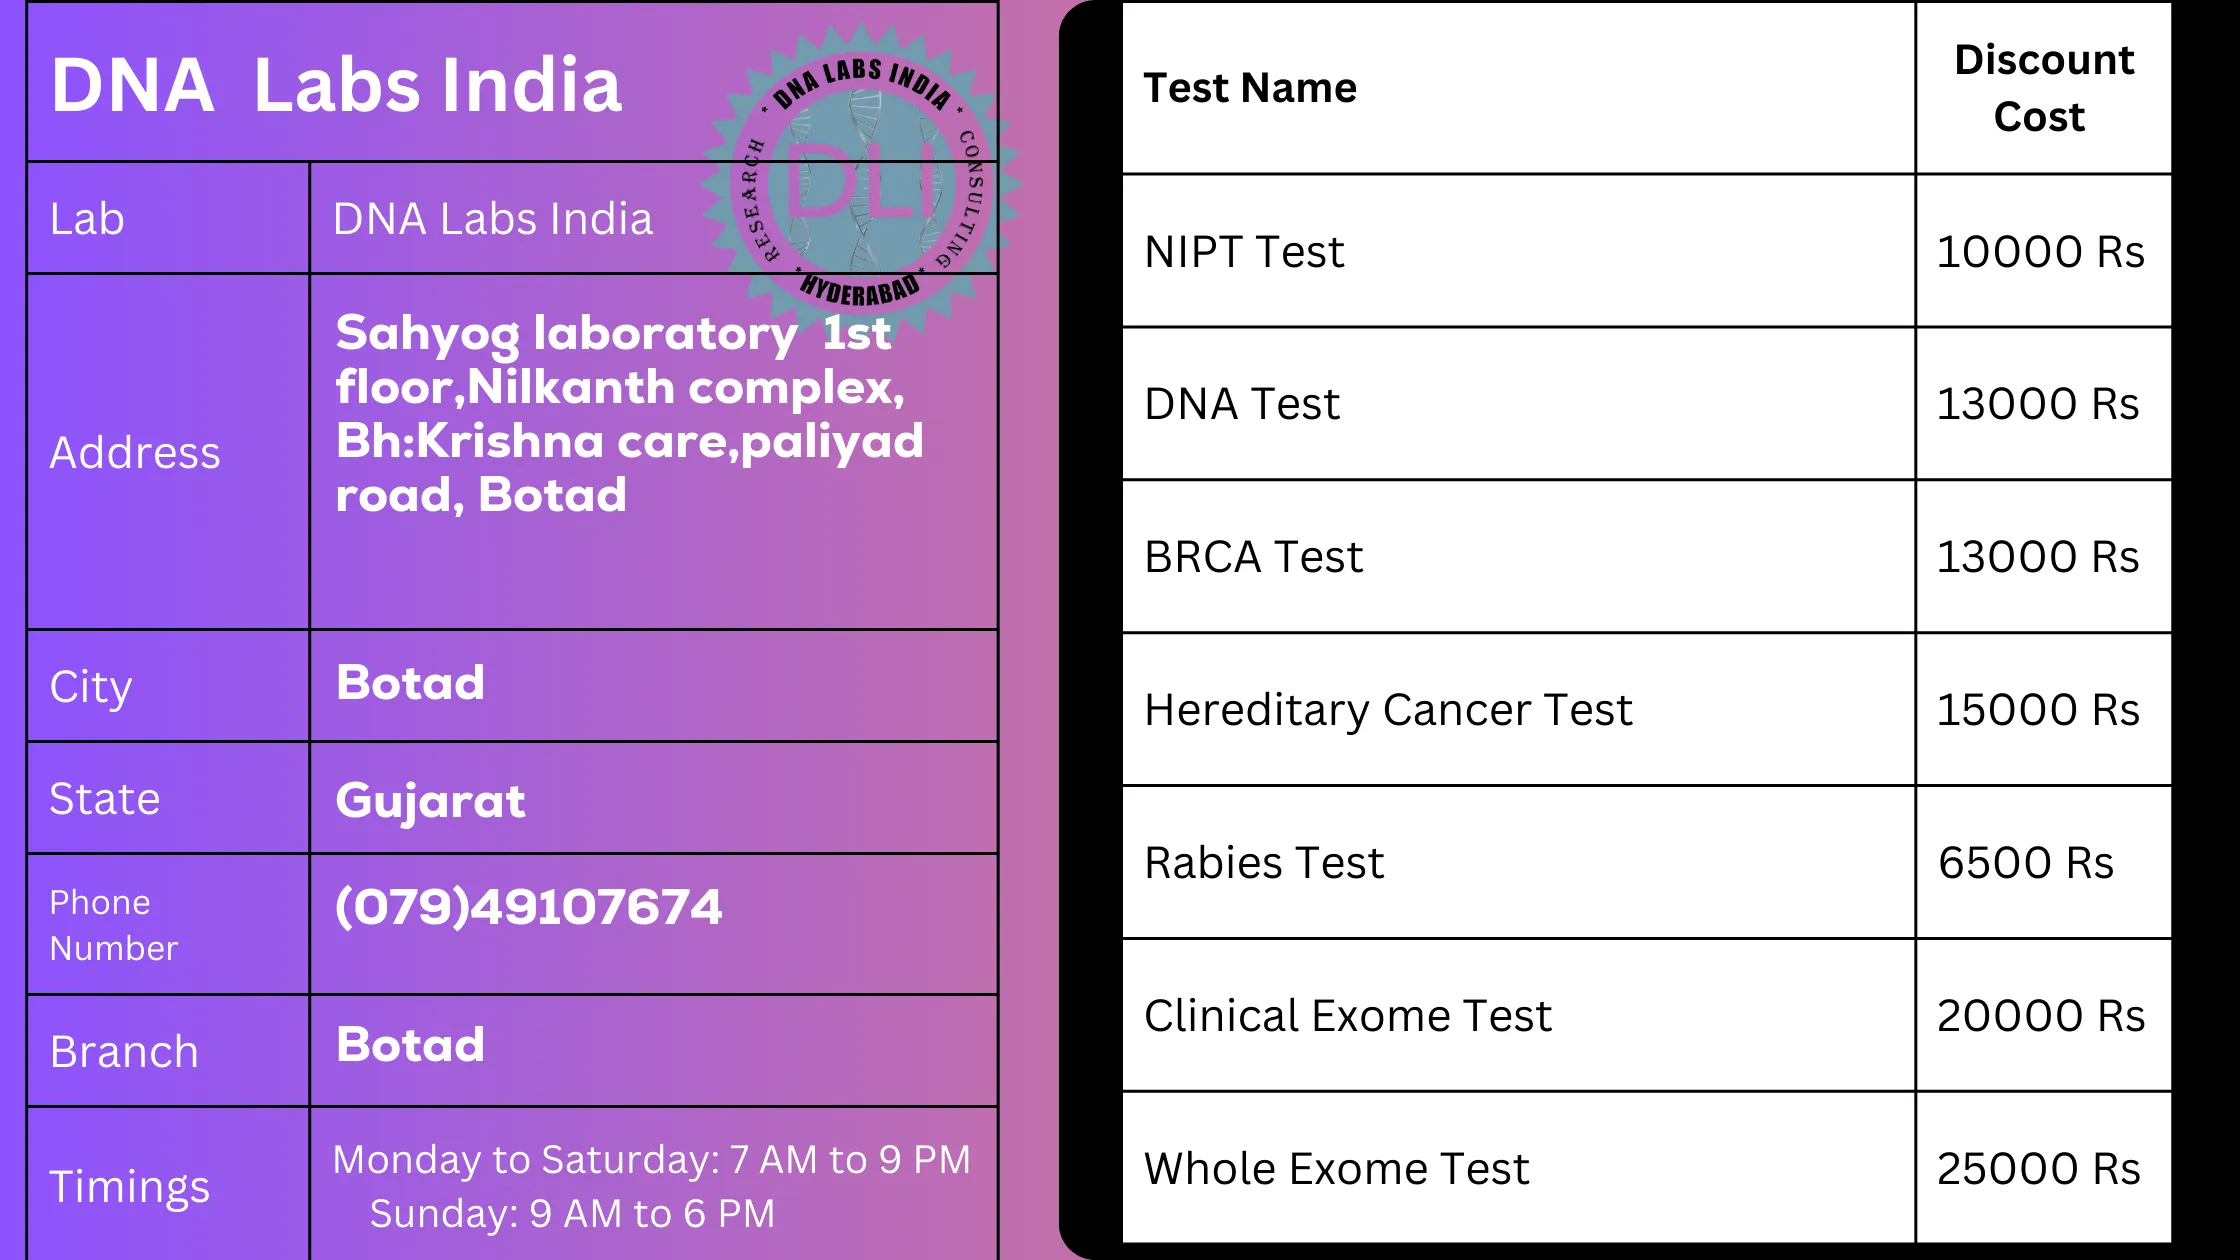 DNA Labs India in Botad - Offering Accurate and Affordable Genetic Testsn